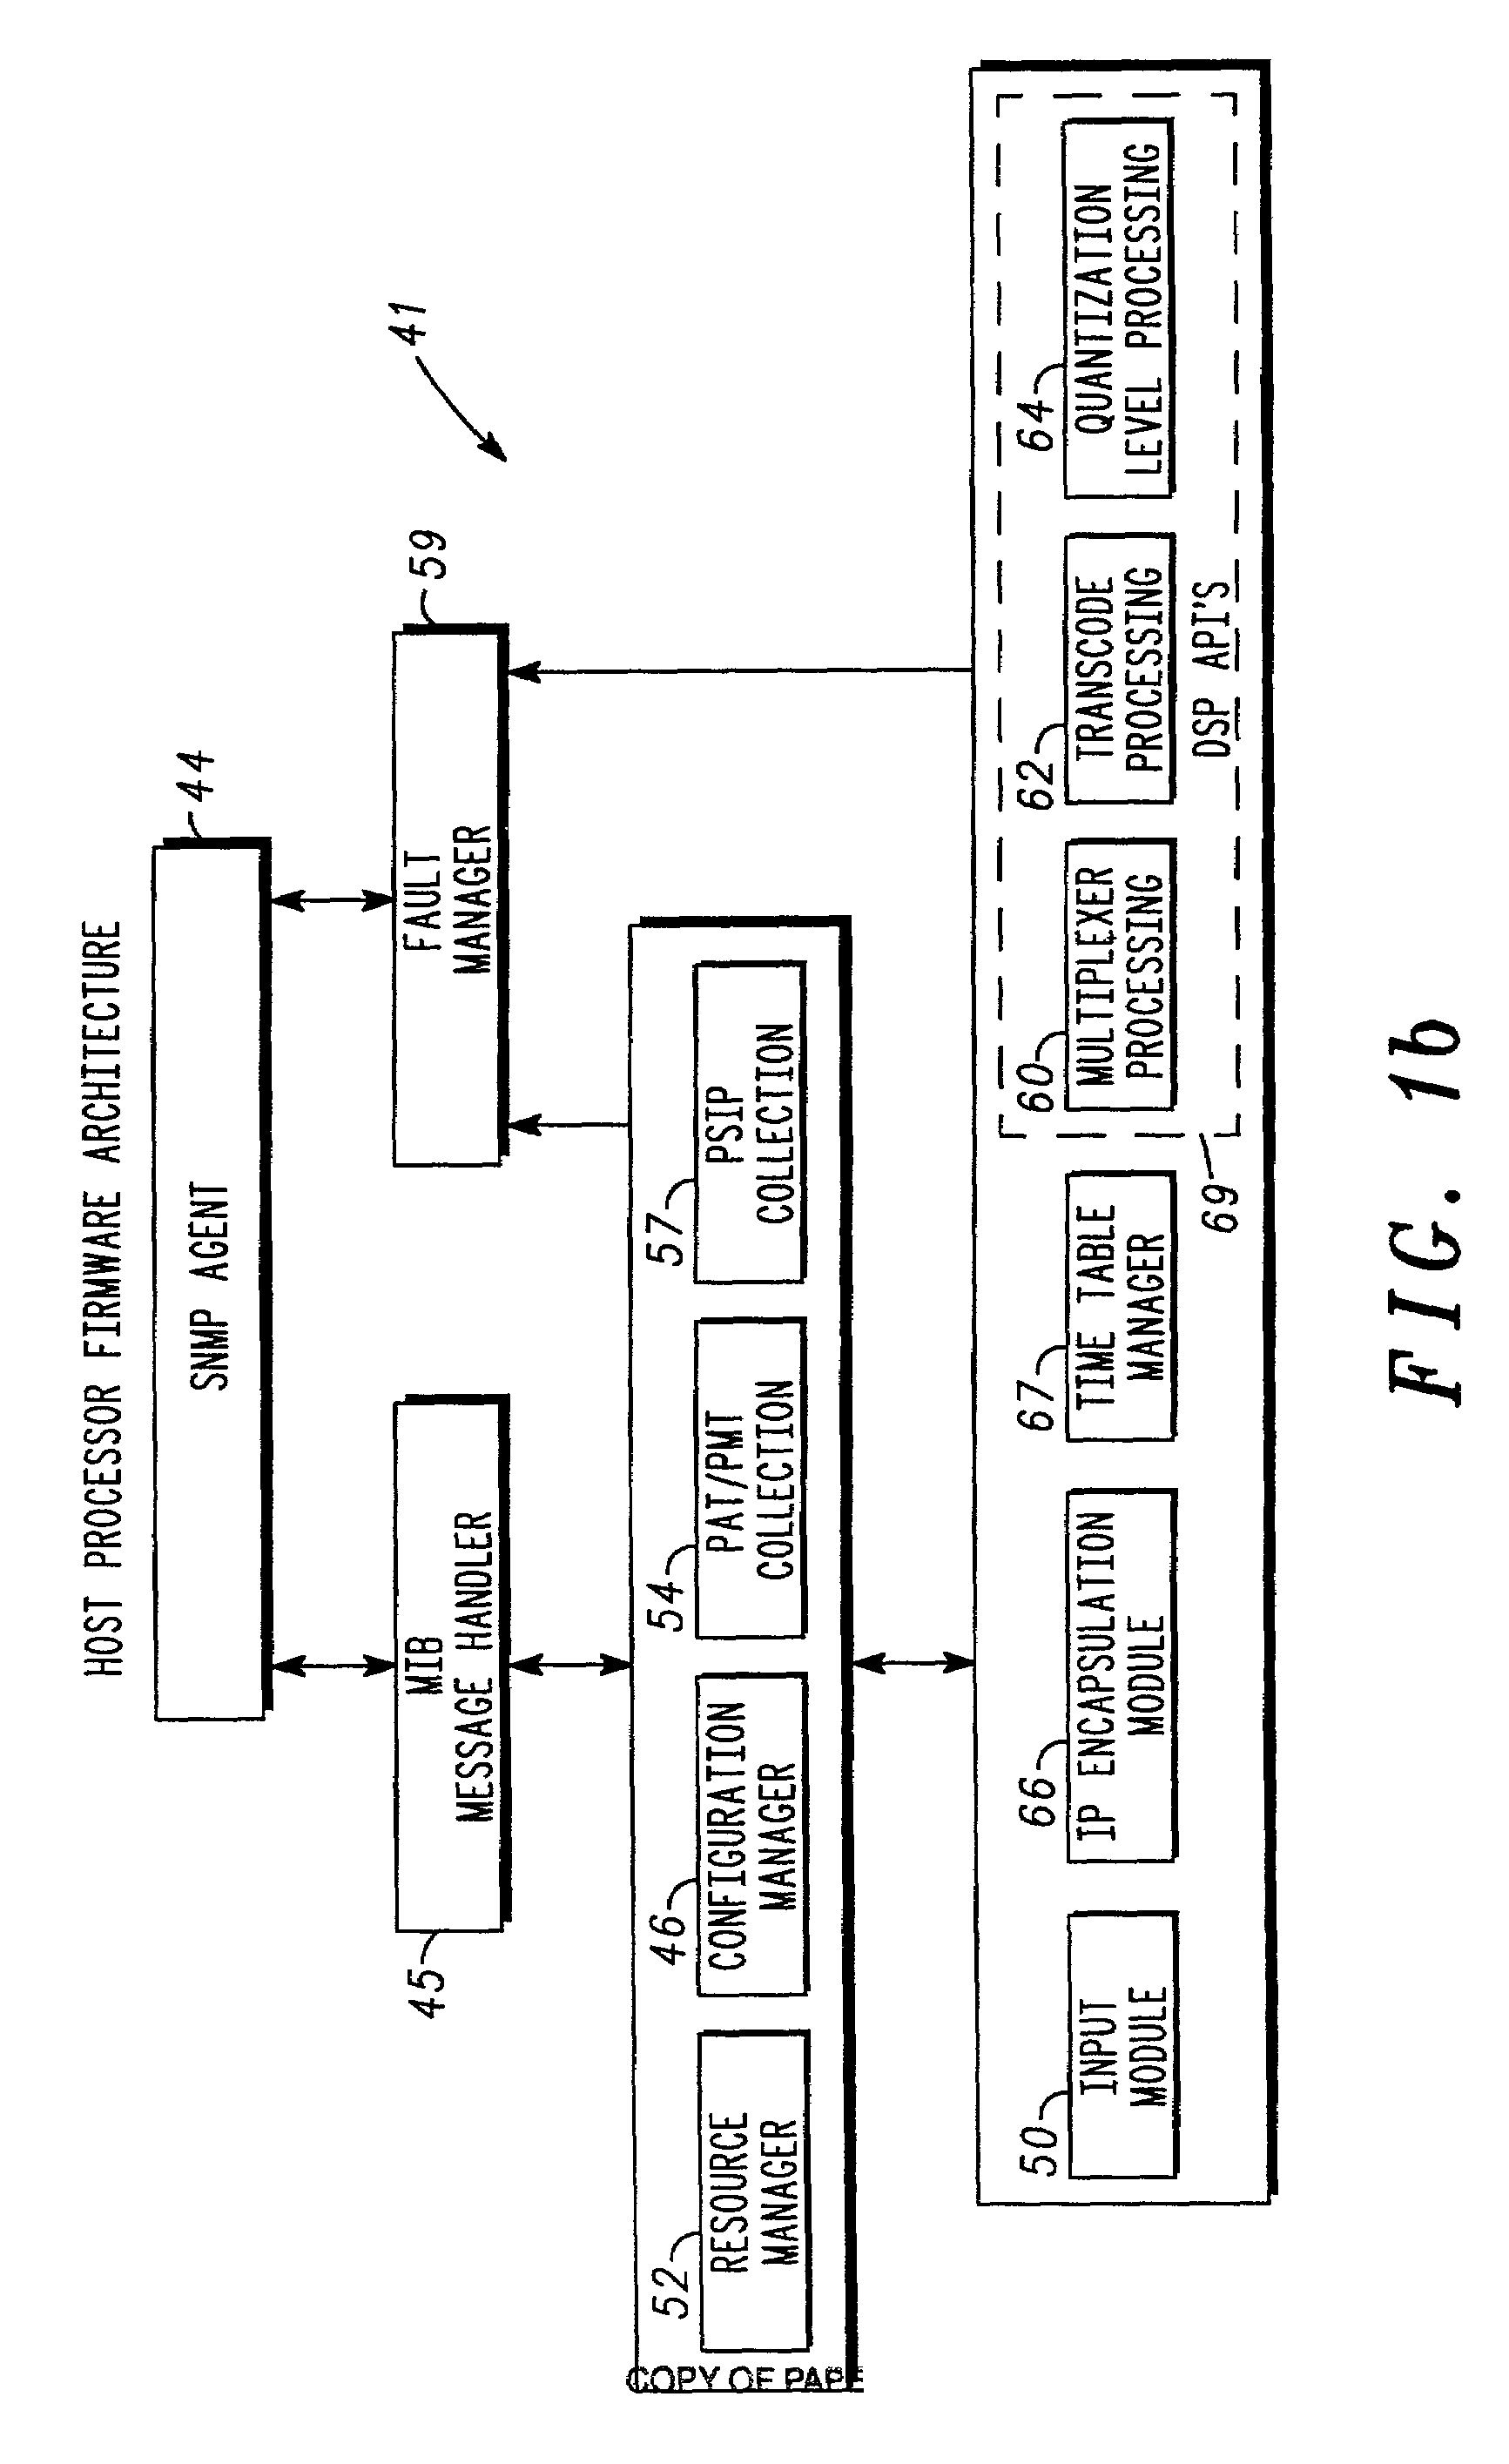 Graphical user interface for a transport multiplexer